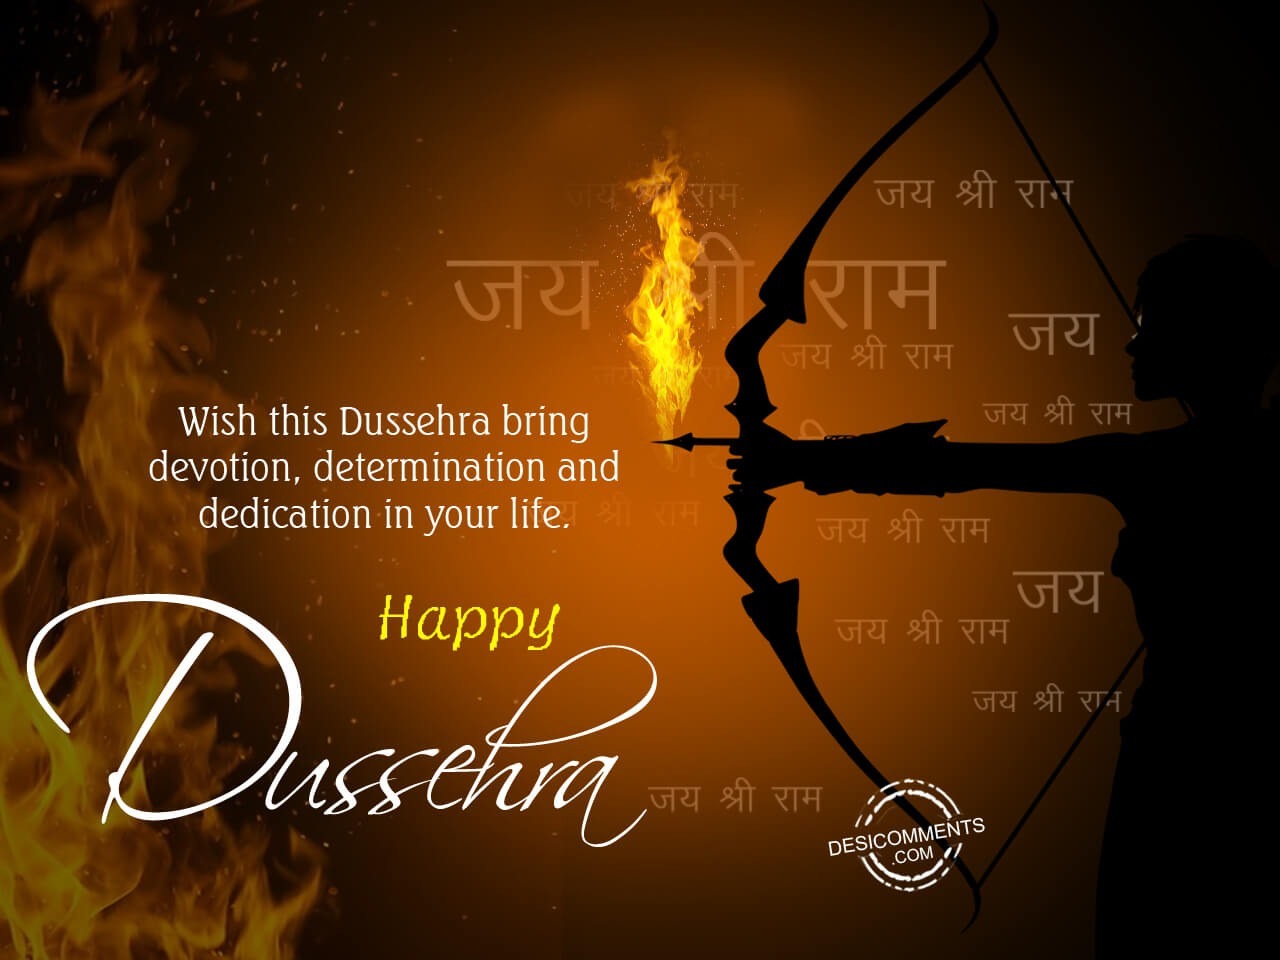 Wishes this Dussehra bring devotion, determination in your life ...